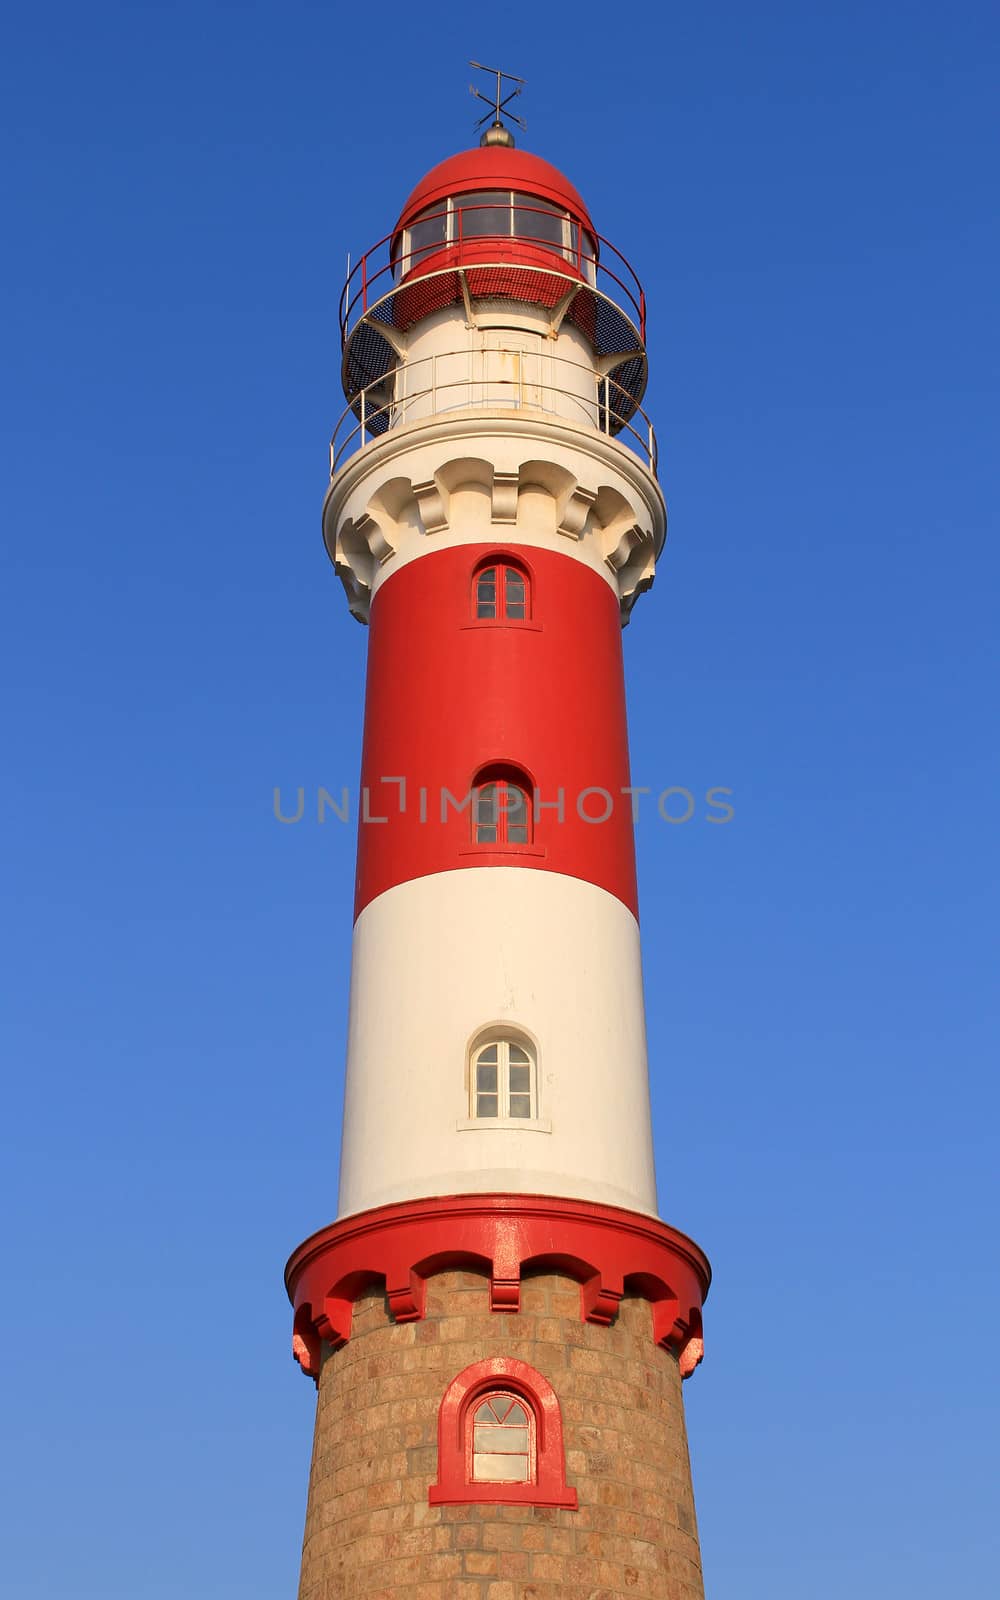 Famous Lighthouse in Swakopmund, a germam style colonial city on the Atlantic coast of northwestern Namibia